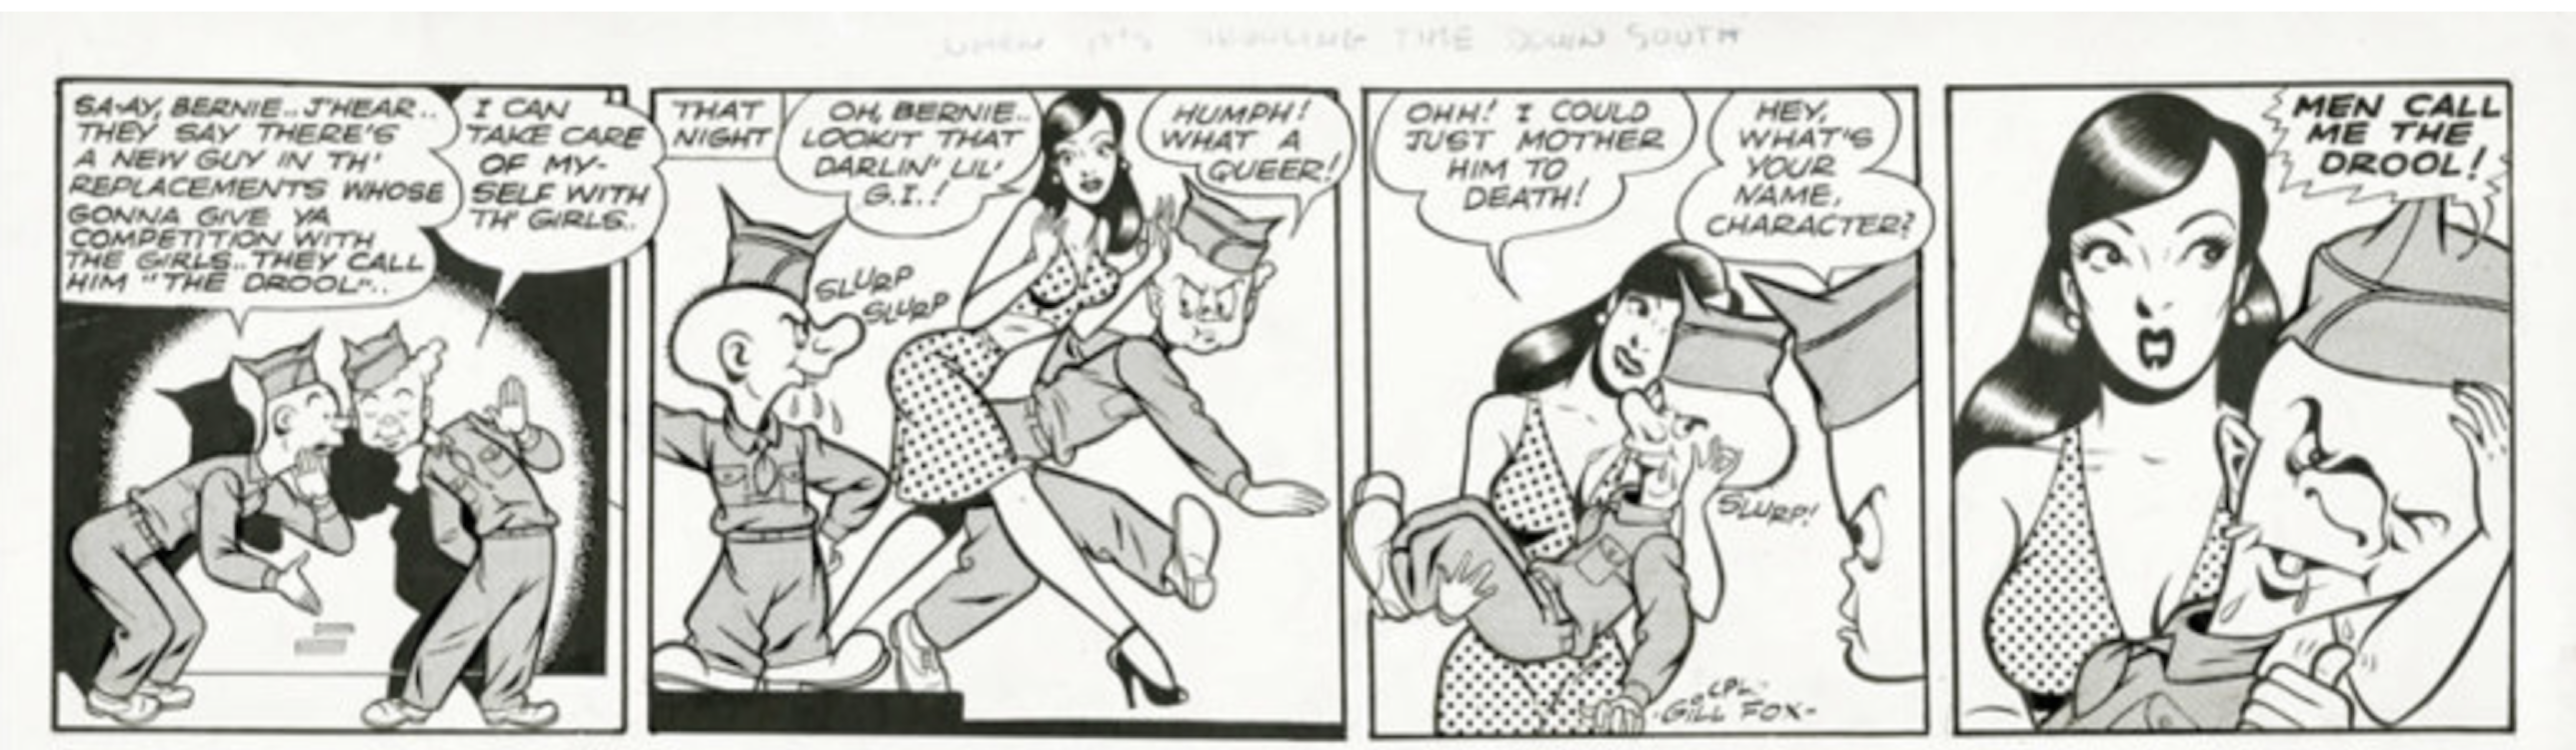 Bernie Blood Comic Strips Group of 5 by Gill Fox sold for $520. Click here to get your original art appraised.